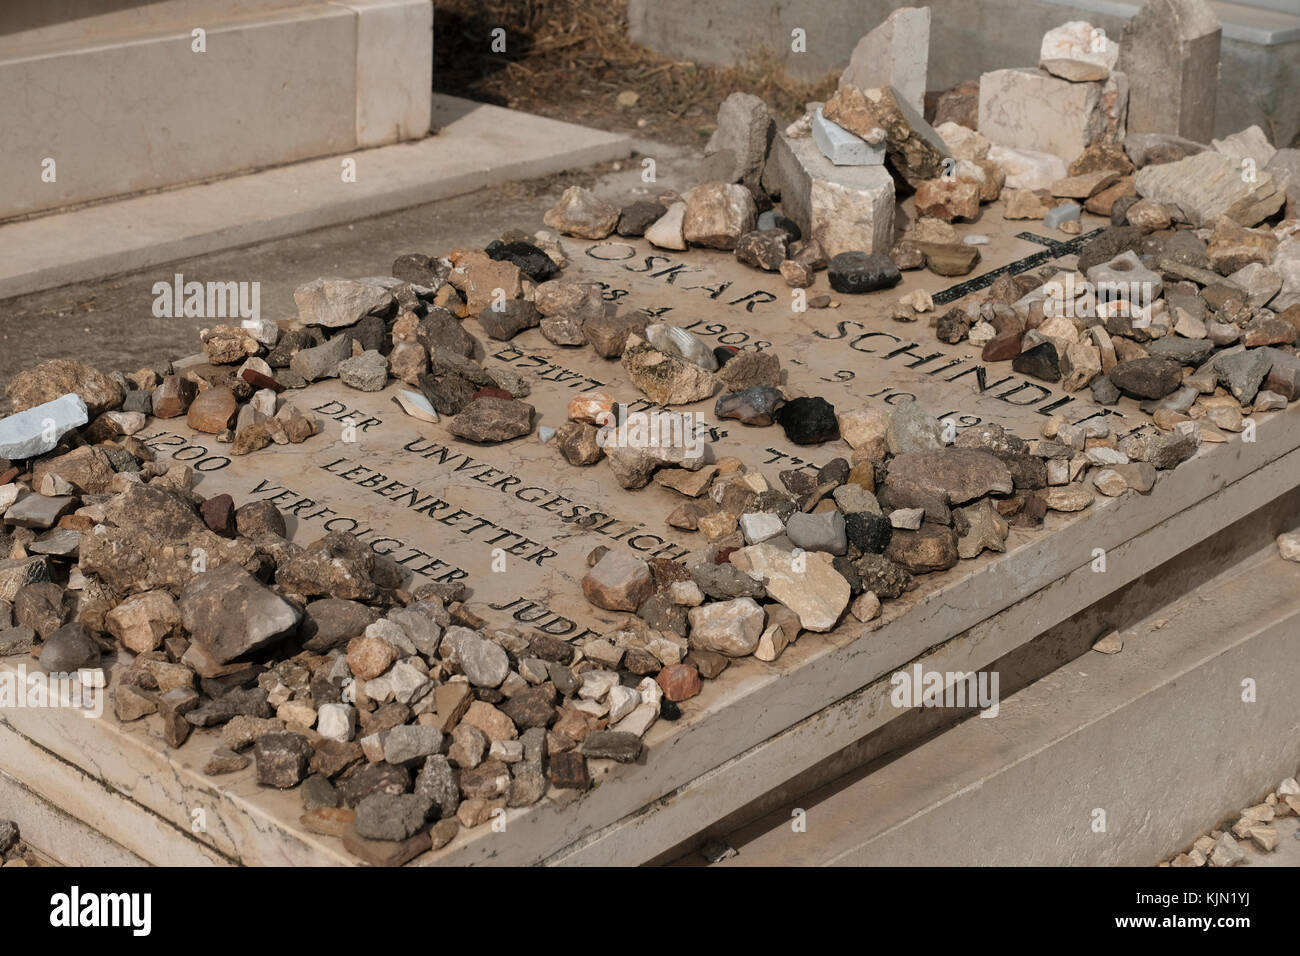 Stones placed in sign of gratitude by Jewish visitors on the grave of Oskar Schindler who was a German industrialist and a member of the Nazi Party, who is credited with saving the lives of 1,200 Jews during the Holocaust located in the Roman Catholic Franciscan cemetery on Mount Zion Jerusalem Israel Stock Photo